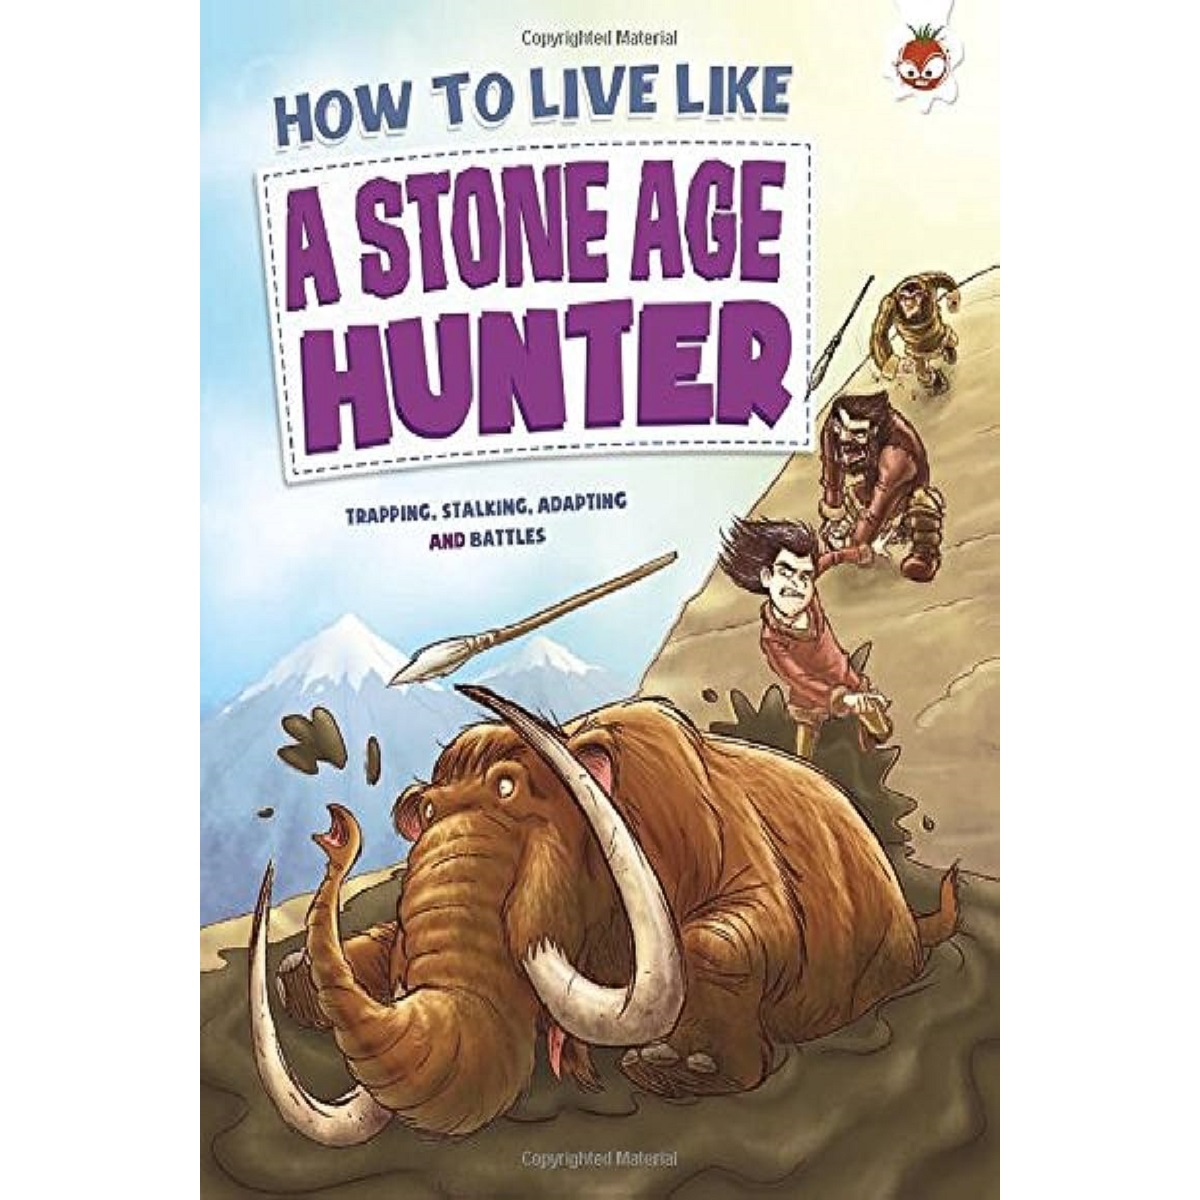 https://www.tarbiyahbooksplus.com/shop/islamic-books-and-products-for-children/how-to-live-like-a-stone-age-hunter/